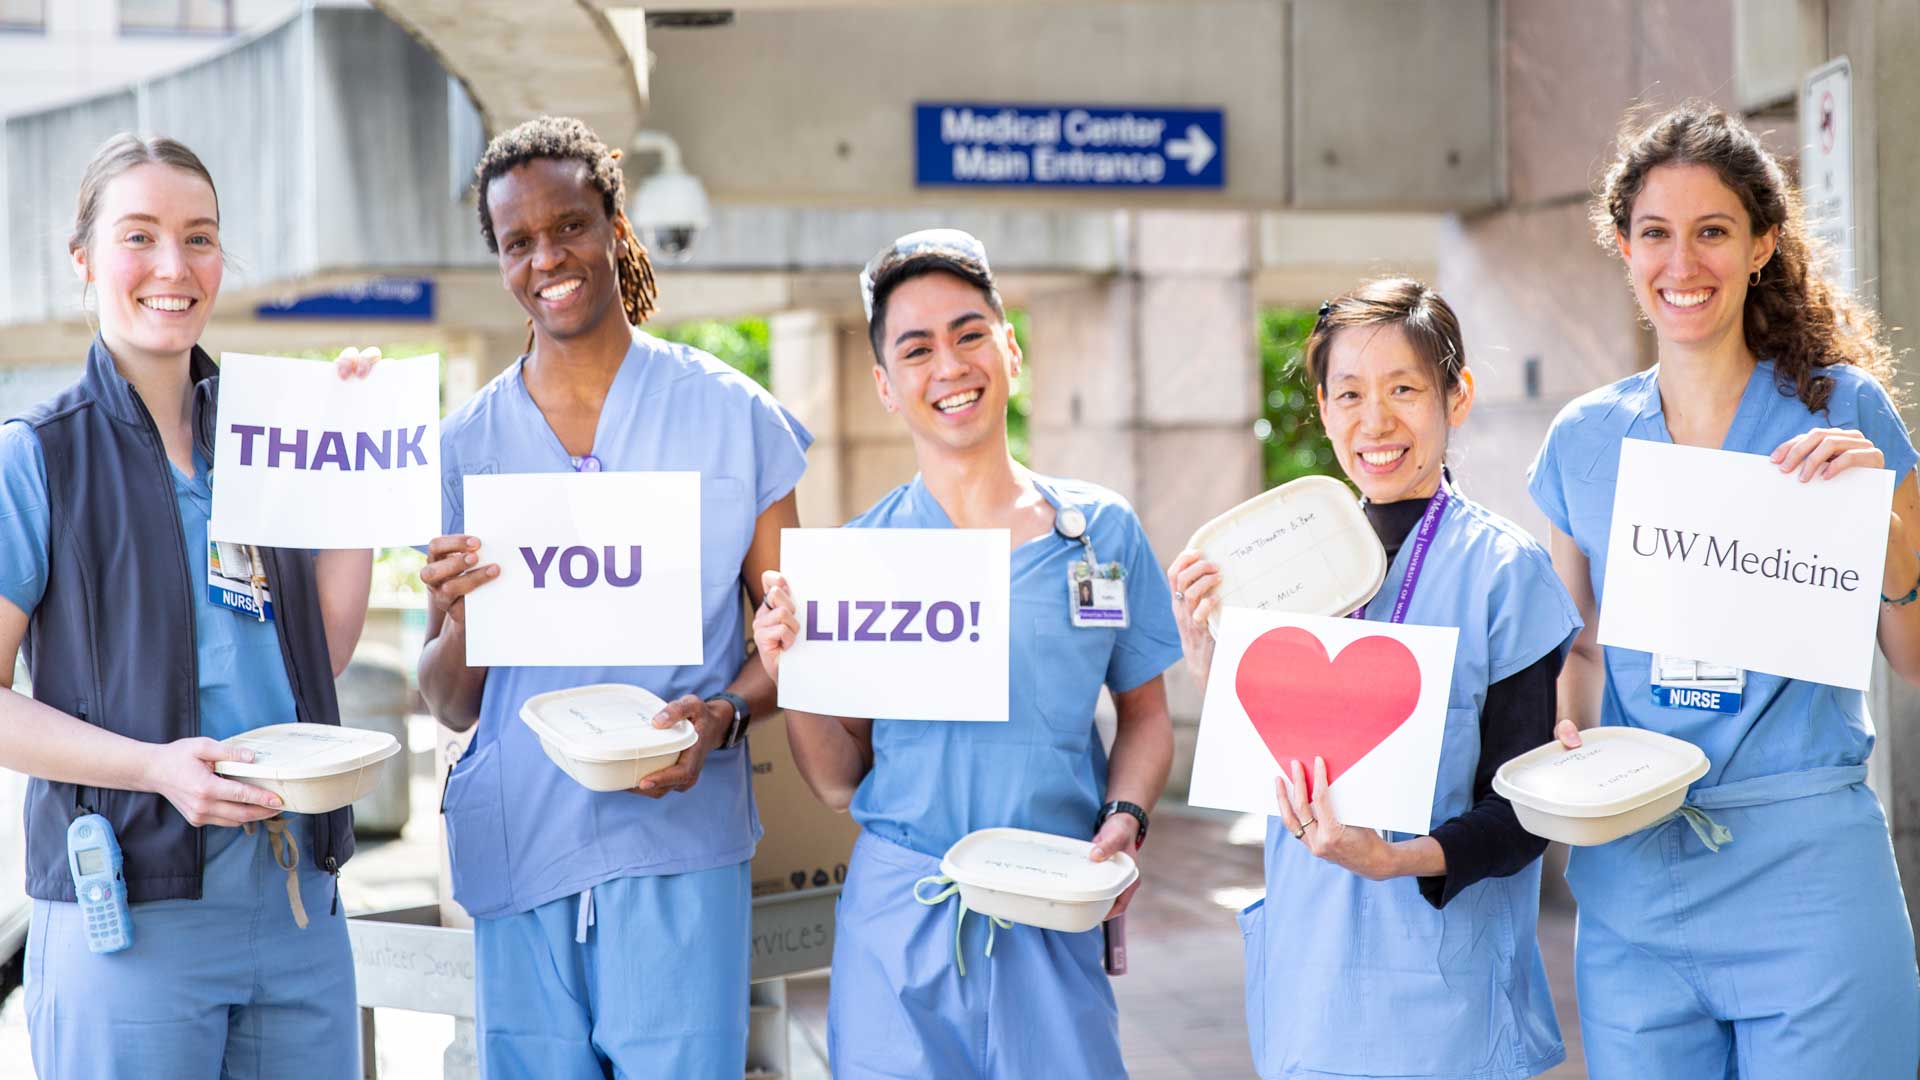 nurses holding up signs thanking lizzo for her donations